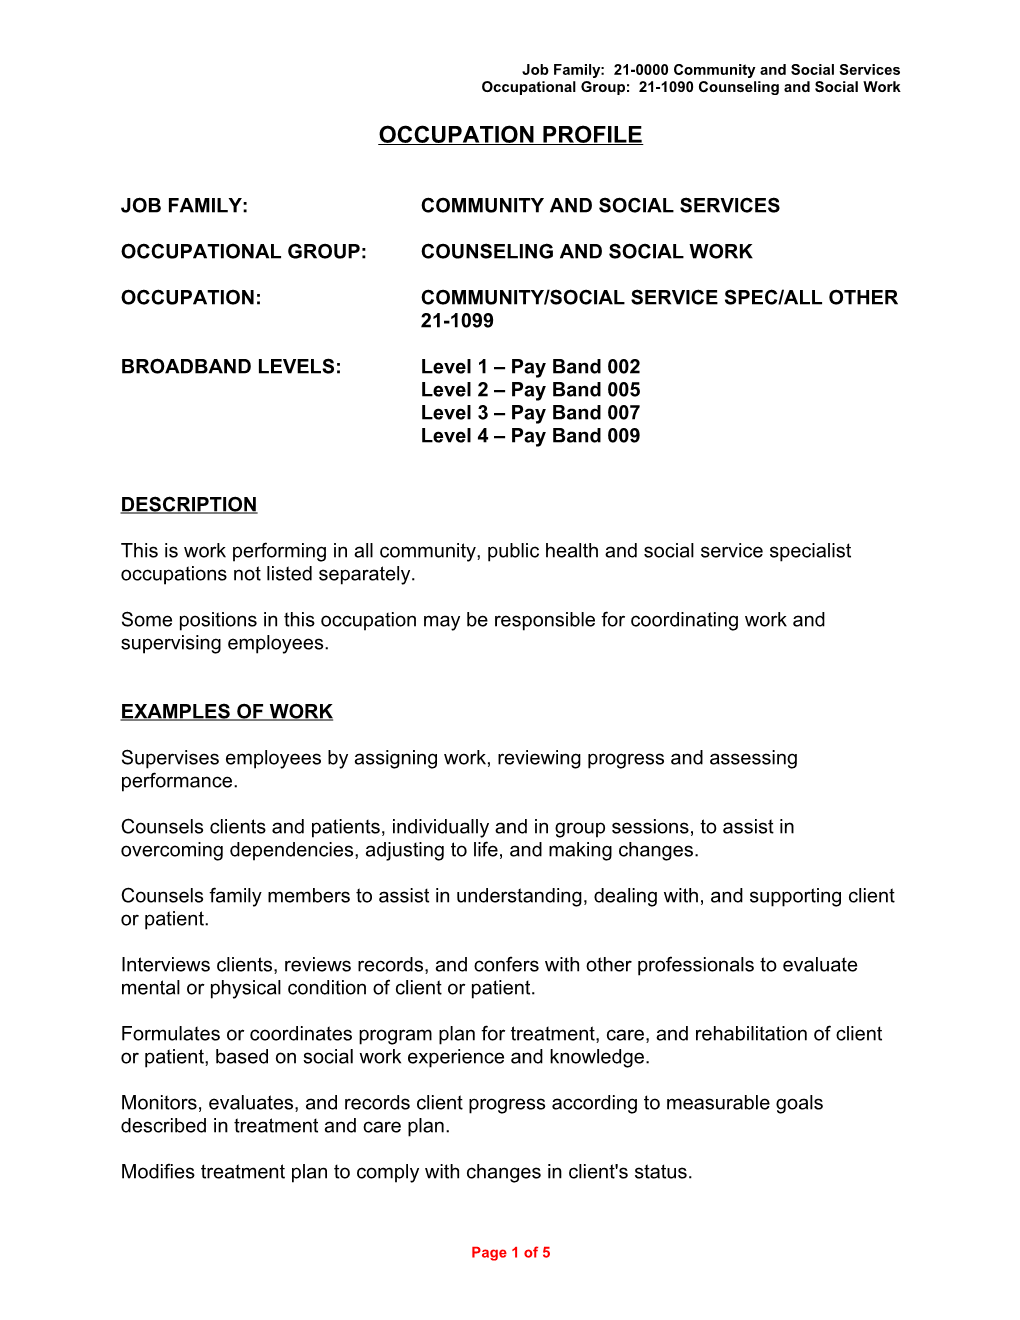 Job Family: 21-0000 Community and Social Services s1